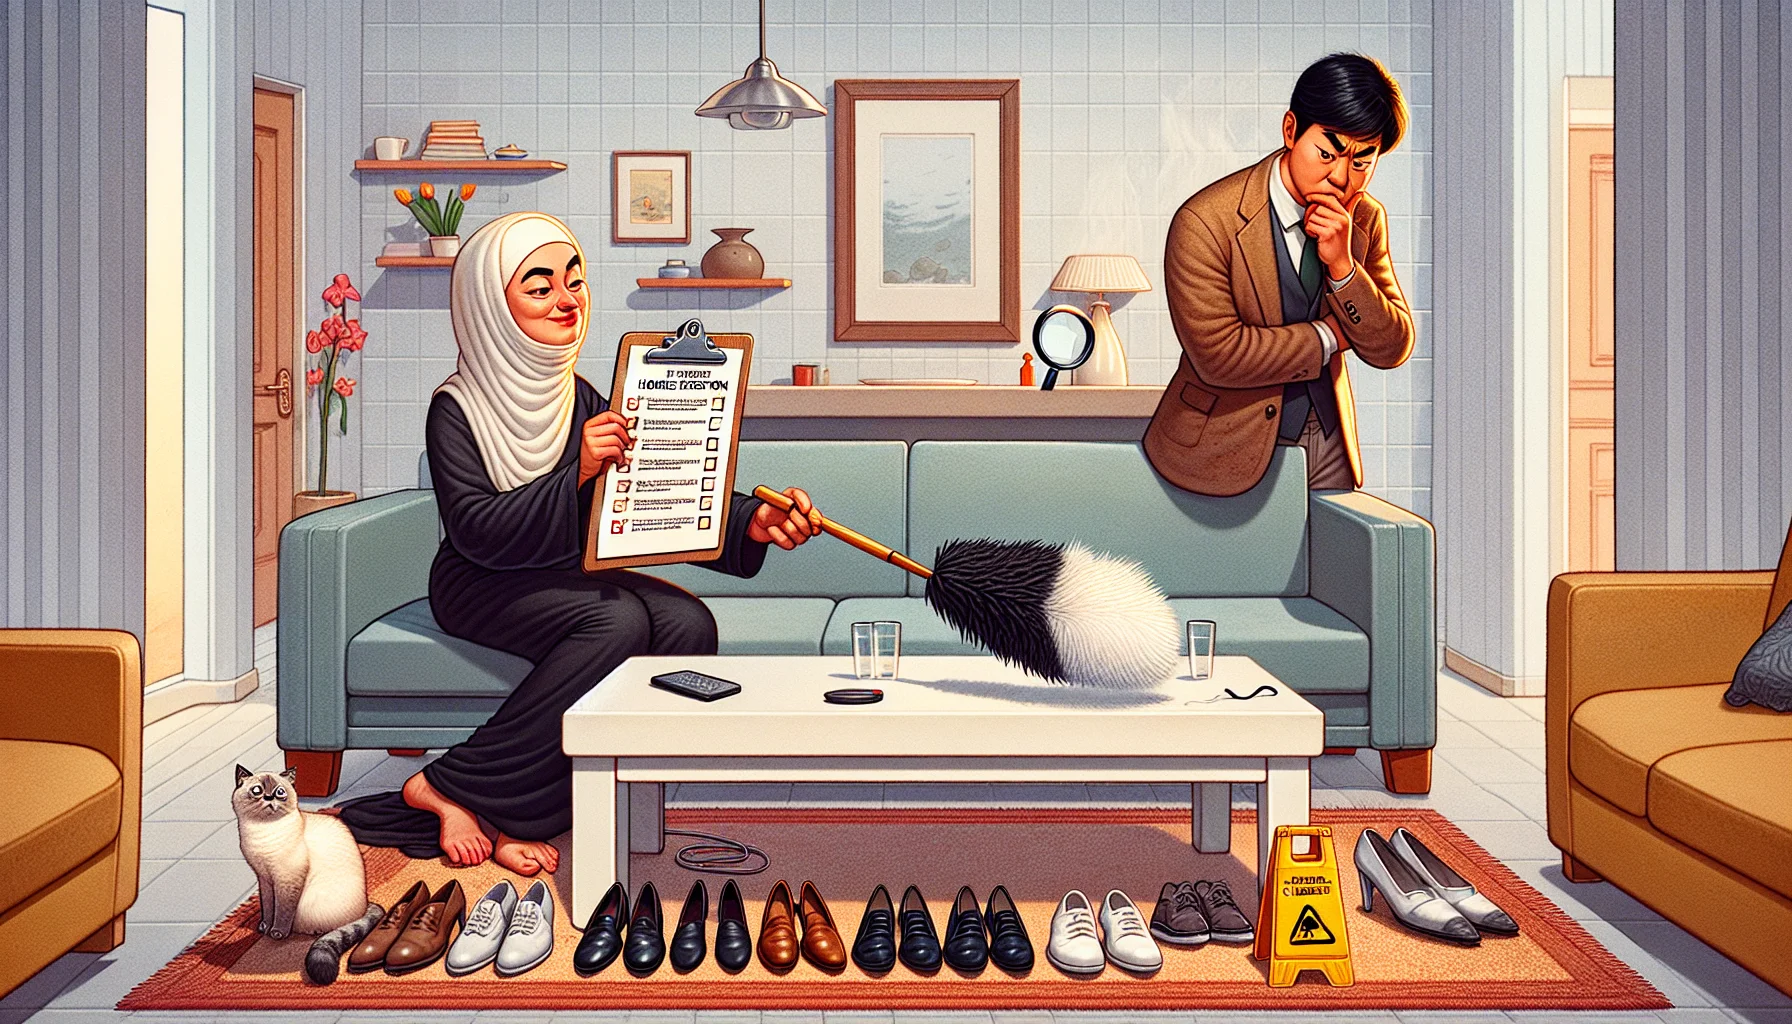 Create an image set in a perfectly clean, gleaming house. A humorous scene is unfolding: A Middle-Eastern woman is dusting a spotless shelf with a feather duster, appearing to scrutinize a nonexistent speck. A Asian man stands nearby, scowling at his perfectly polished shoes, as if displeased they can't be cleaner. On the coffee table is a clipboard with a list marked 'Home Inspection Checklist', all boxes ticked, and a magnifying glass lies beside it. A cat in the corner is seen wearing a tiny hard hat, suggesting it's the 'home inspector'.